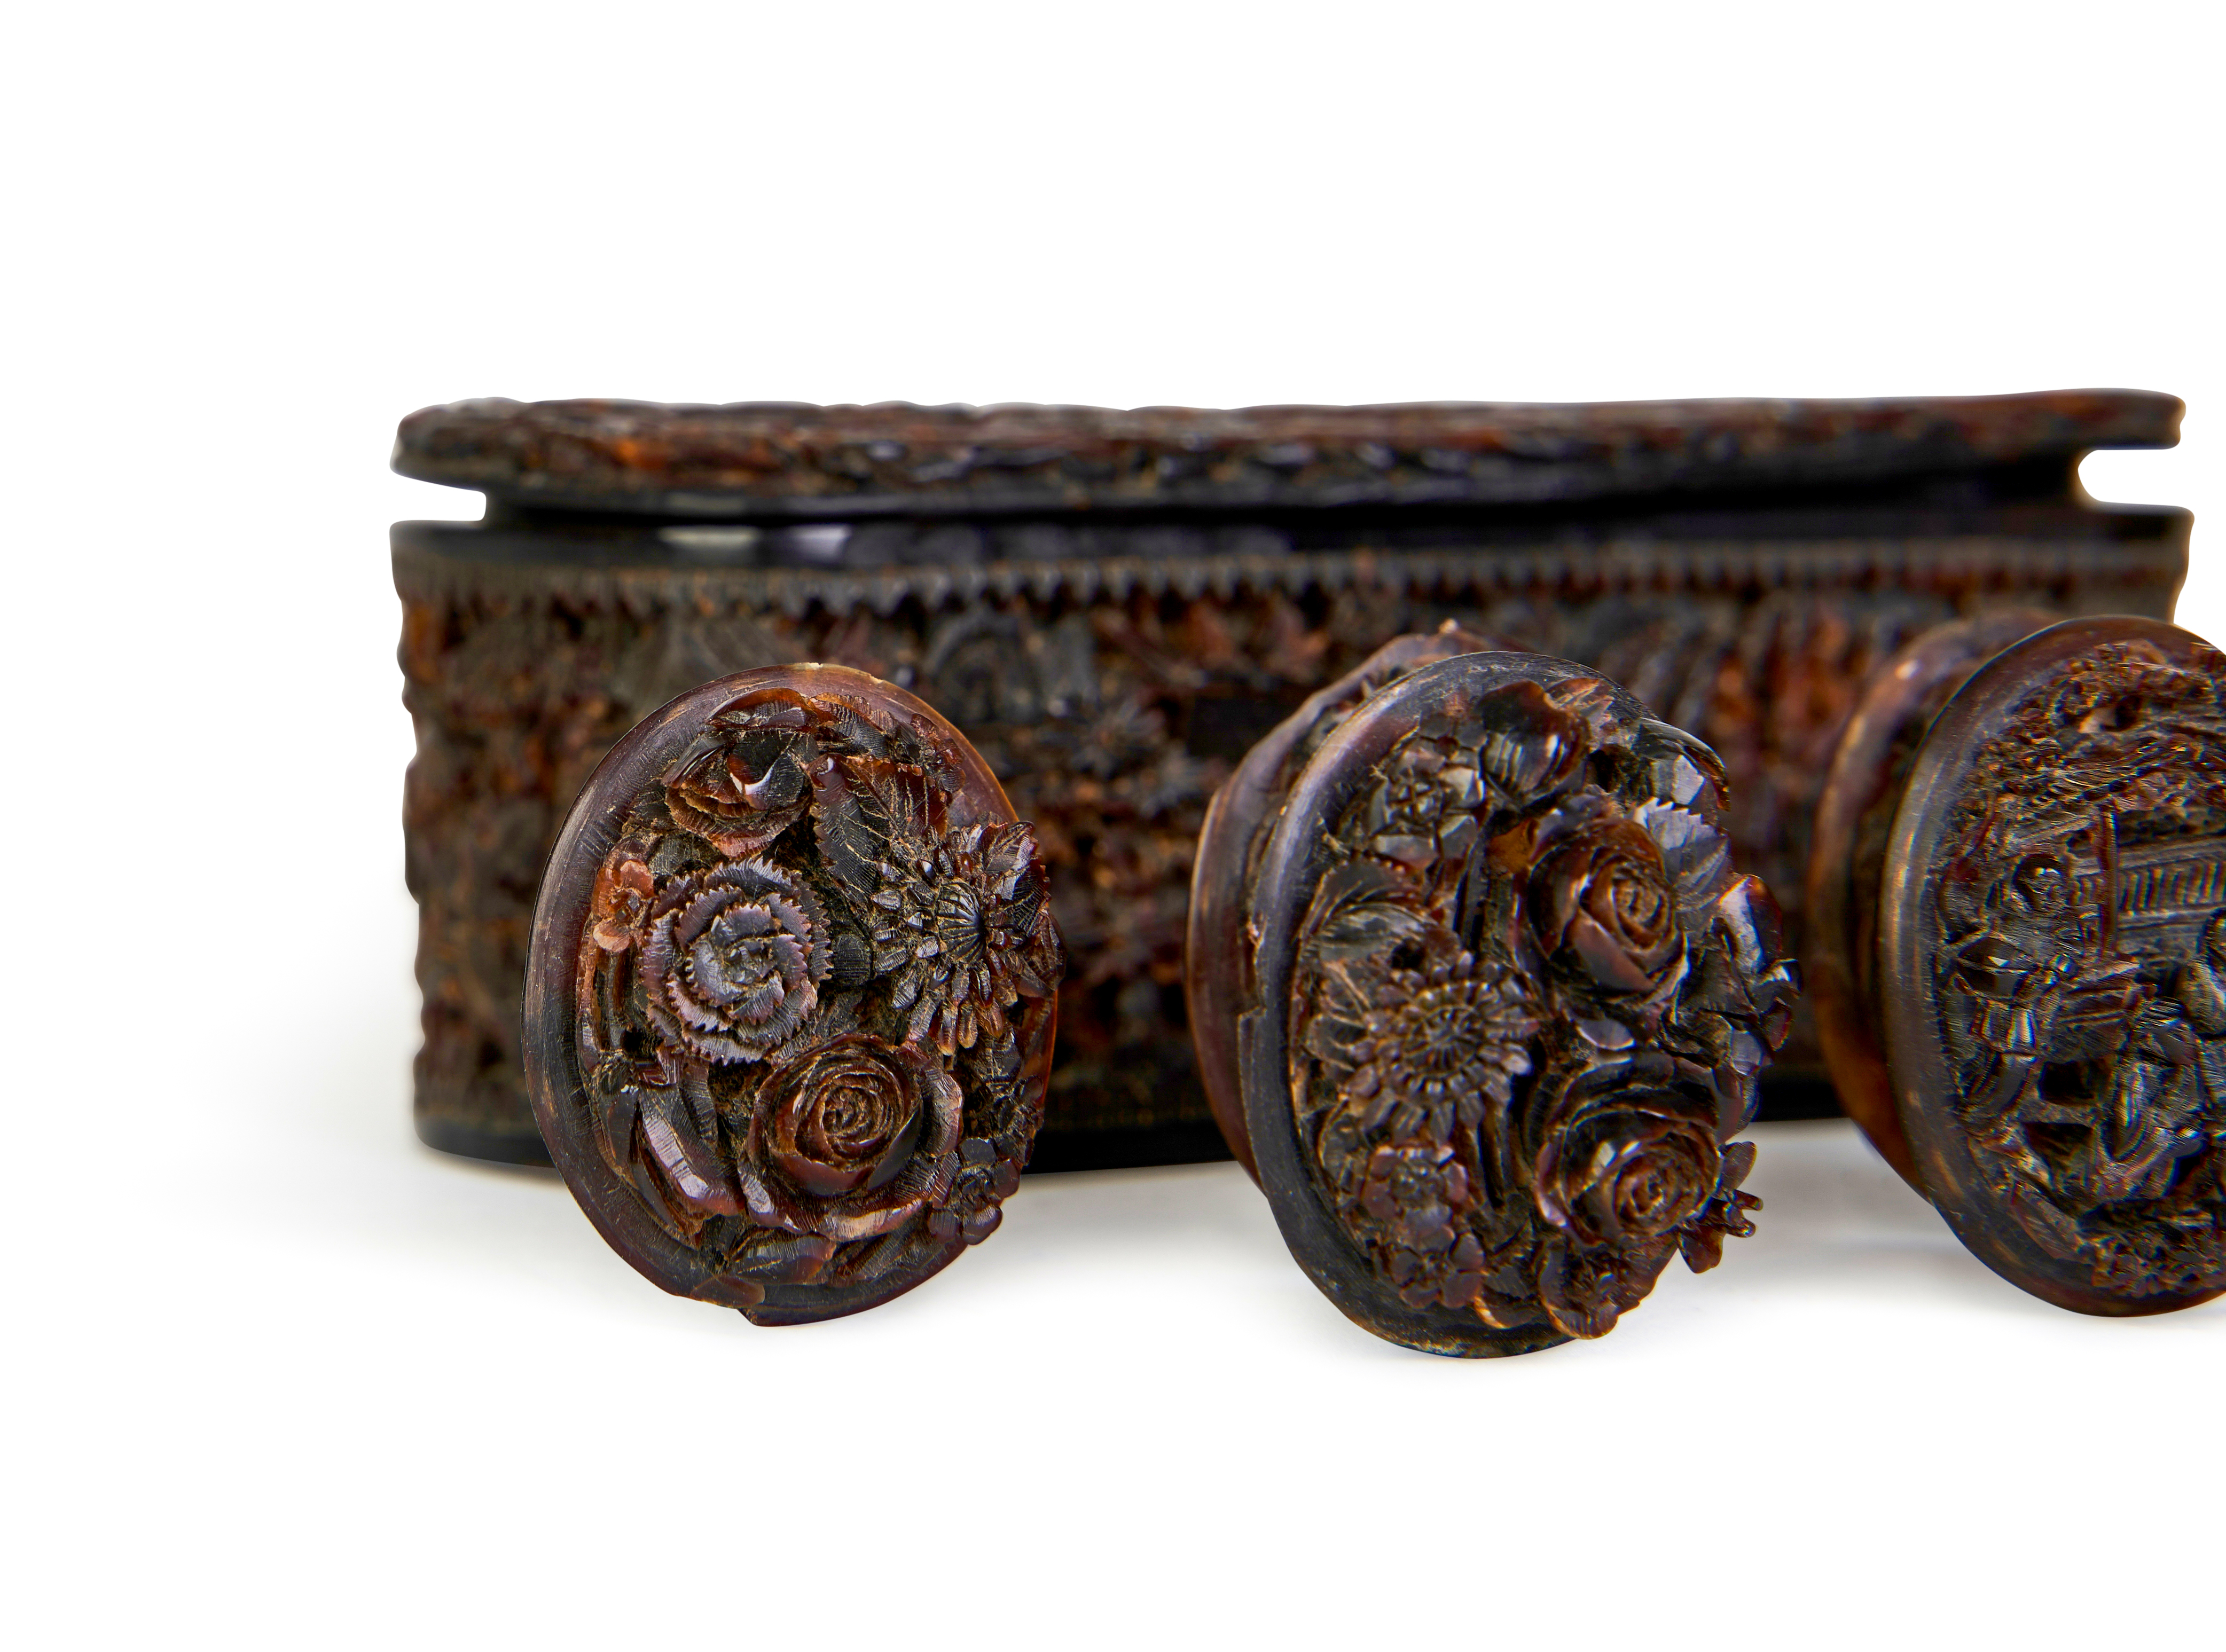 ASSORTMENT OF CARVED CHINESE TORTOISE SHELL BOXES, 18TH CENTURY - Image 6 of 9